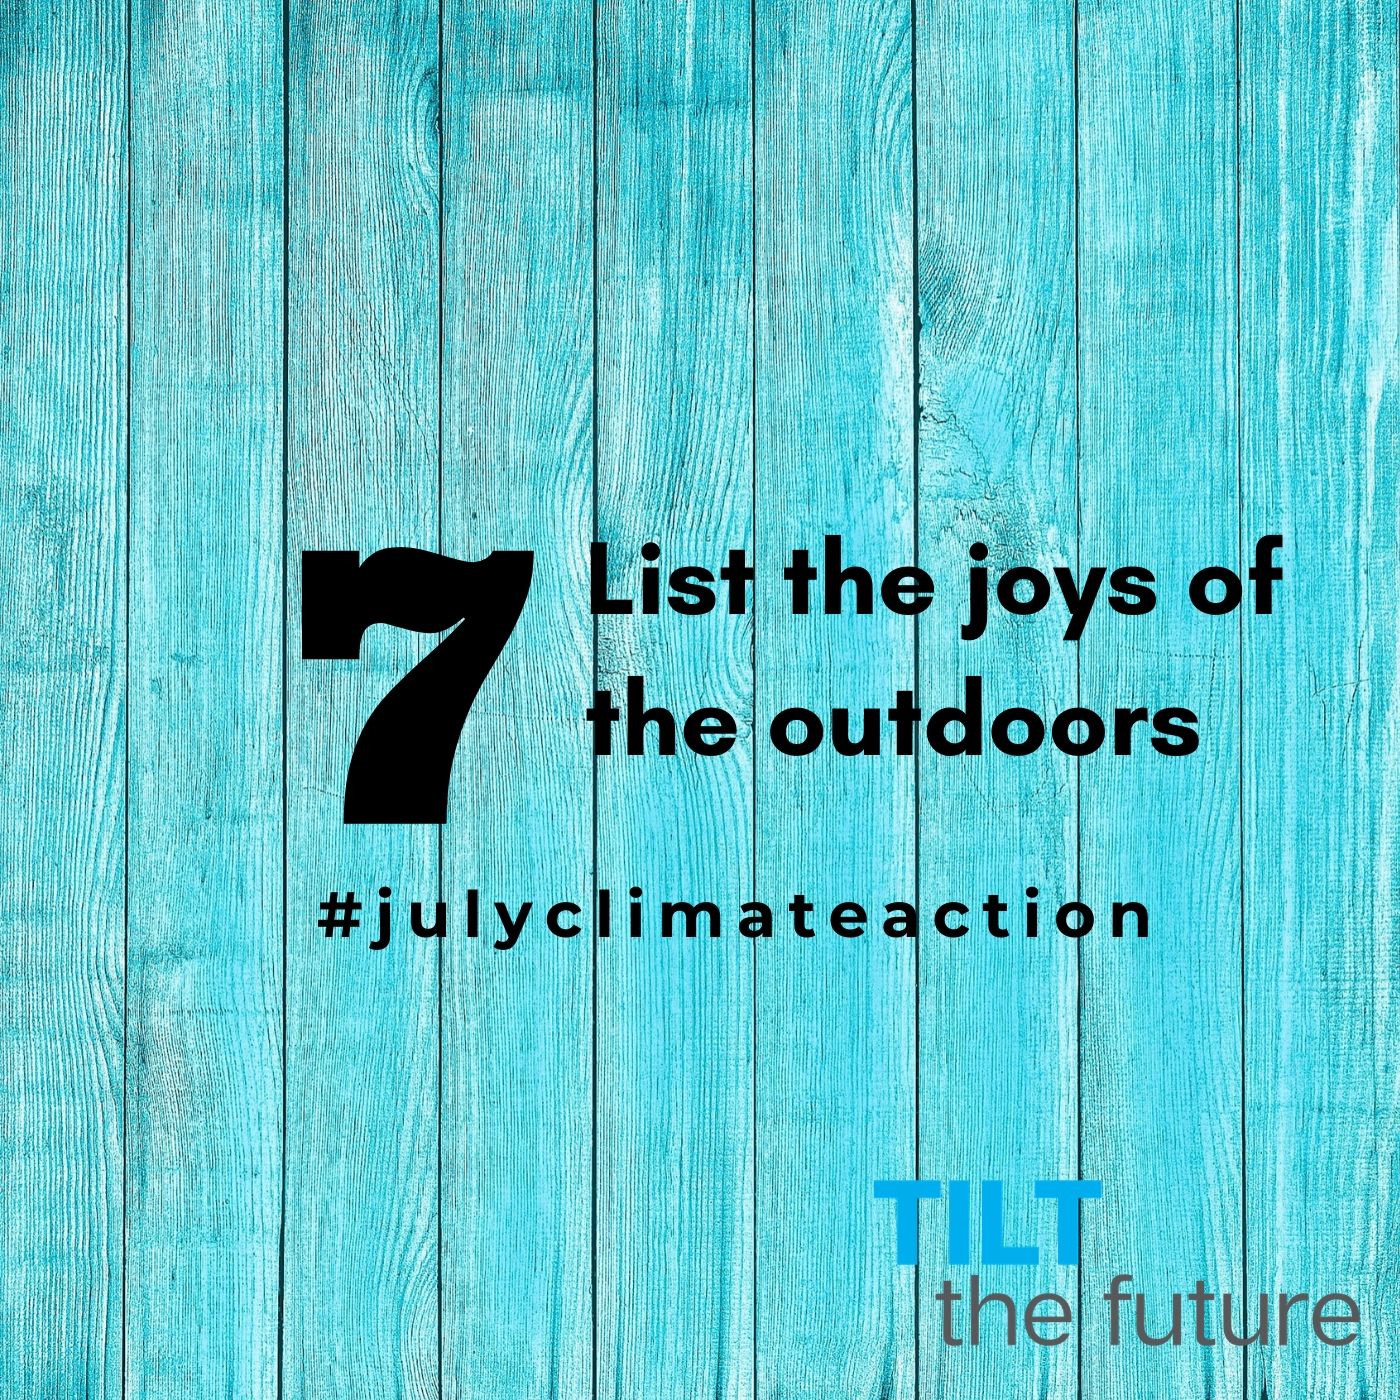 list 7 joys of the outdoors on blue fencing